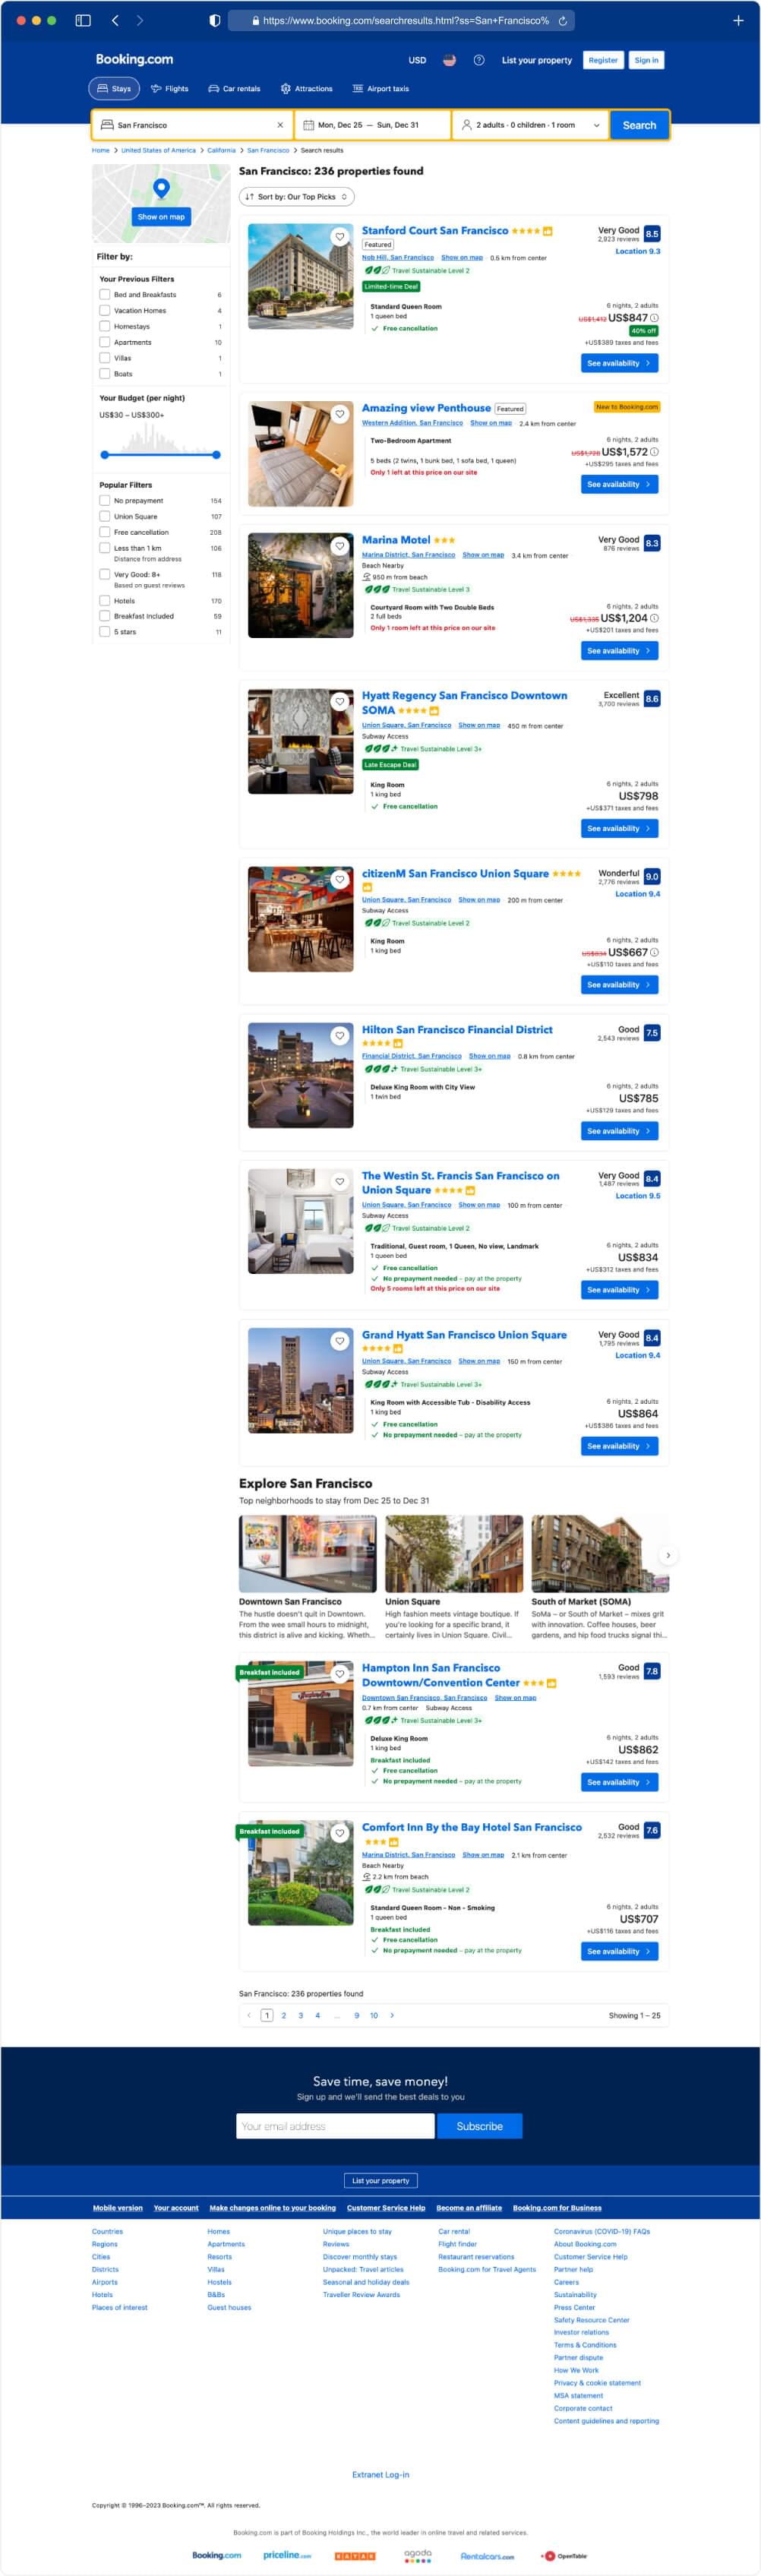 Booking.com search result page